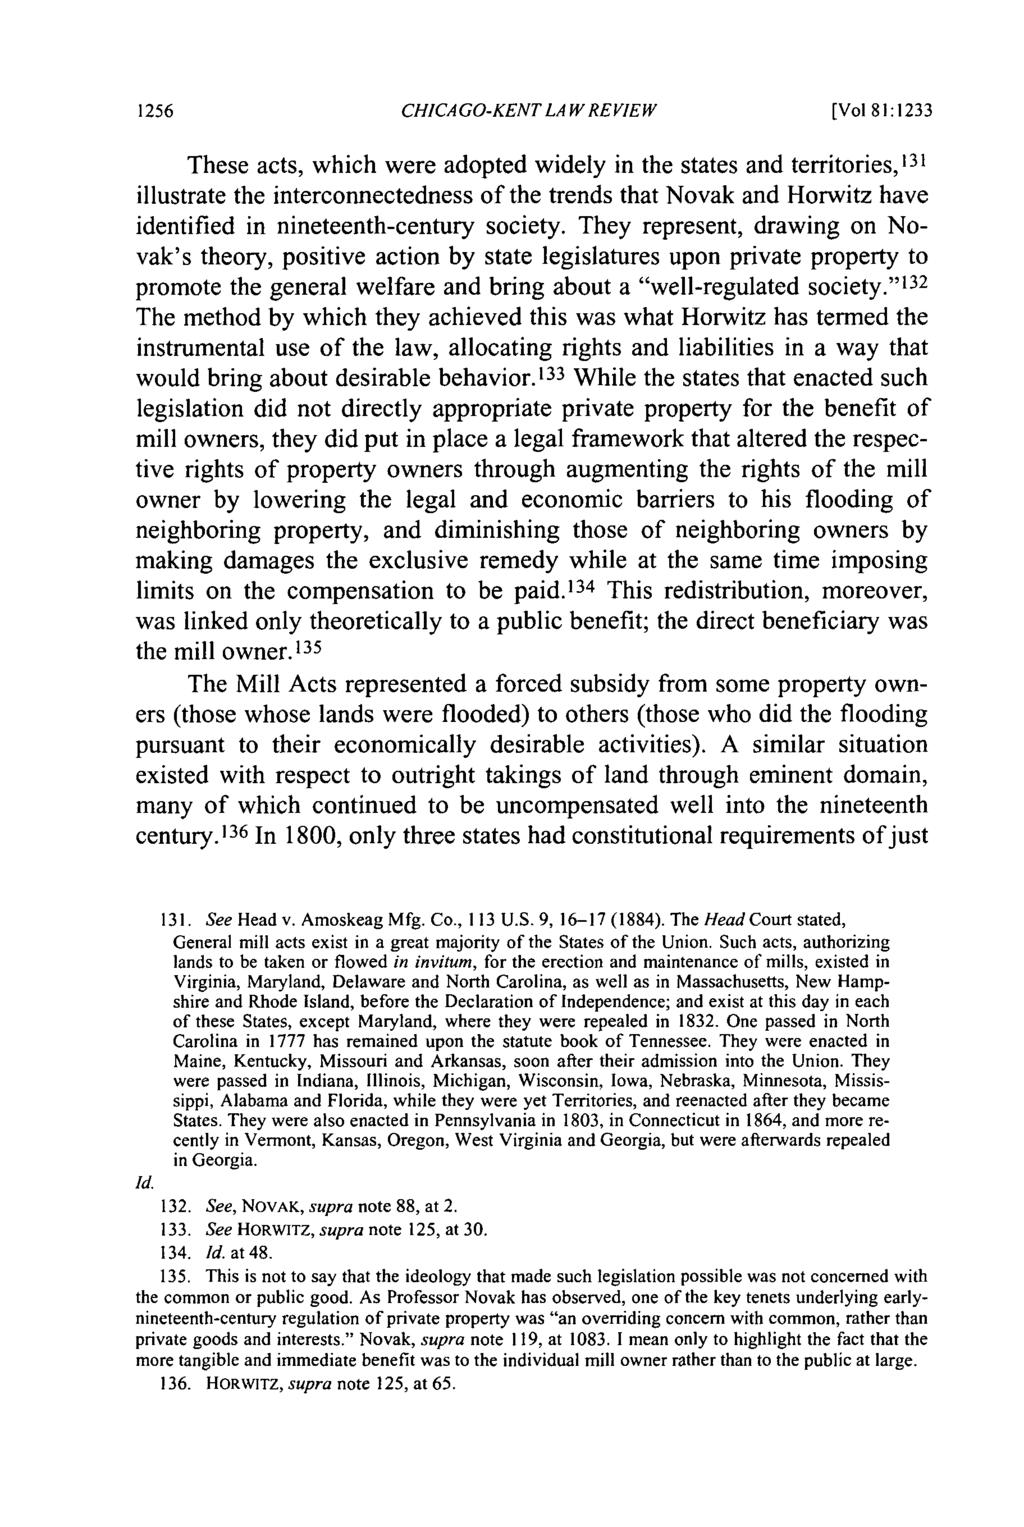 CHICAGO-KENT LAW REVIEW [Vol 81:1233 These acts, which were adopted widely in the states and territories, 131 illustrate the interconnectedness of the trends that Novak and Horwitz have identified in